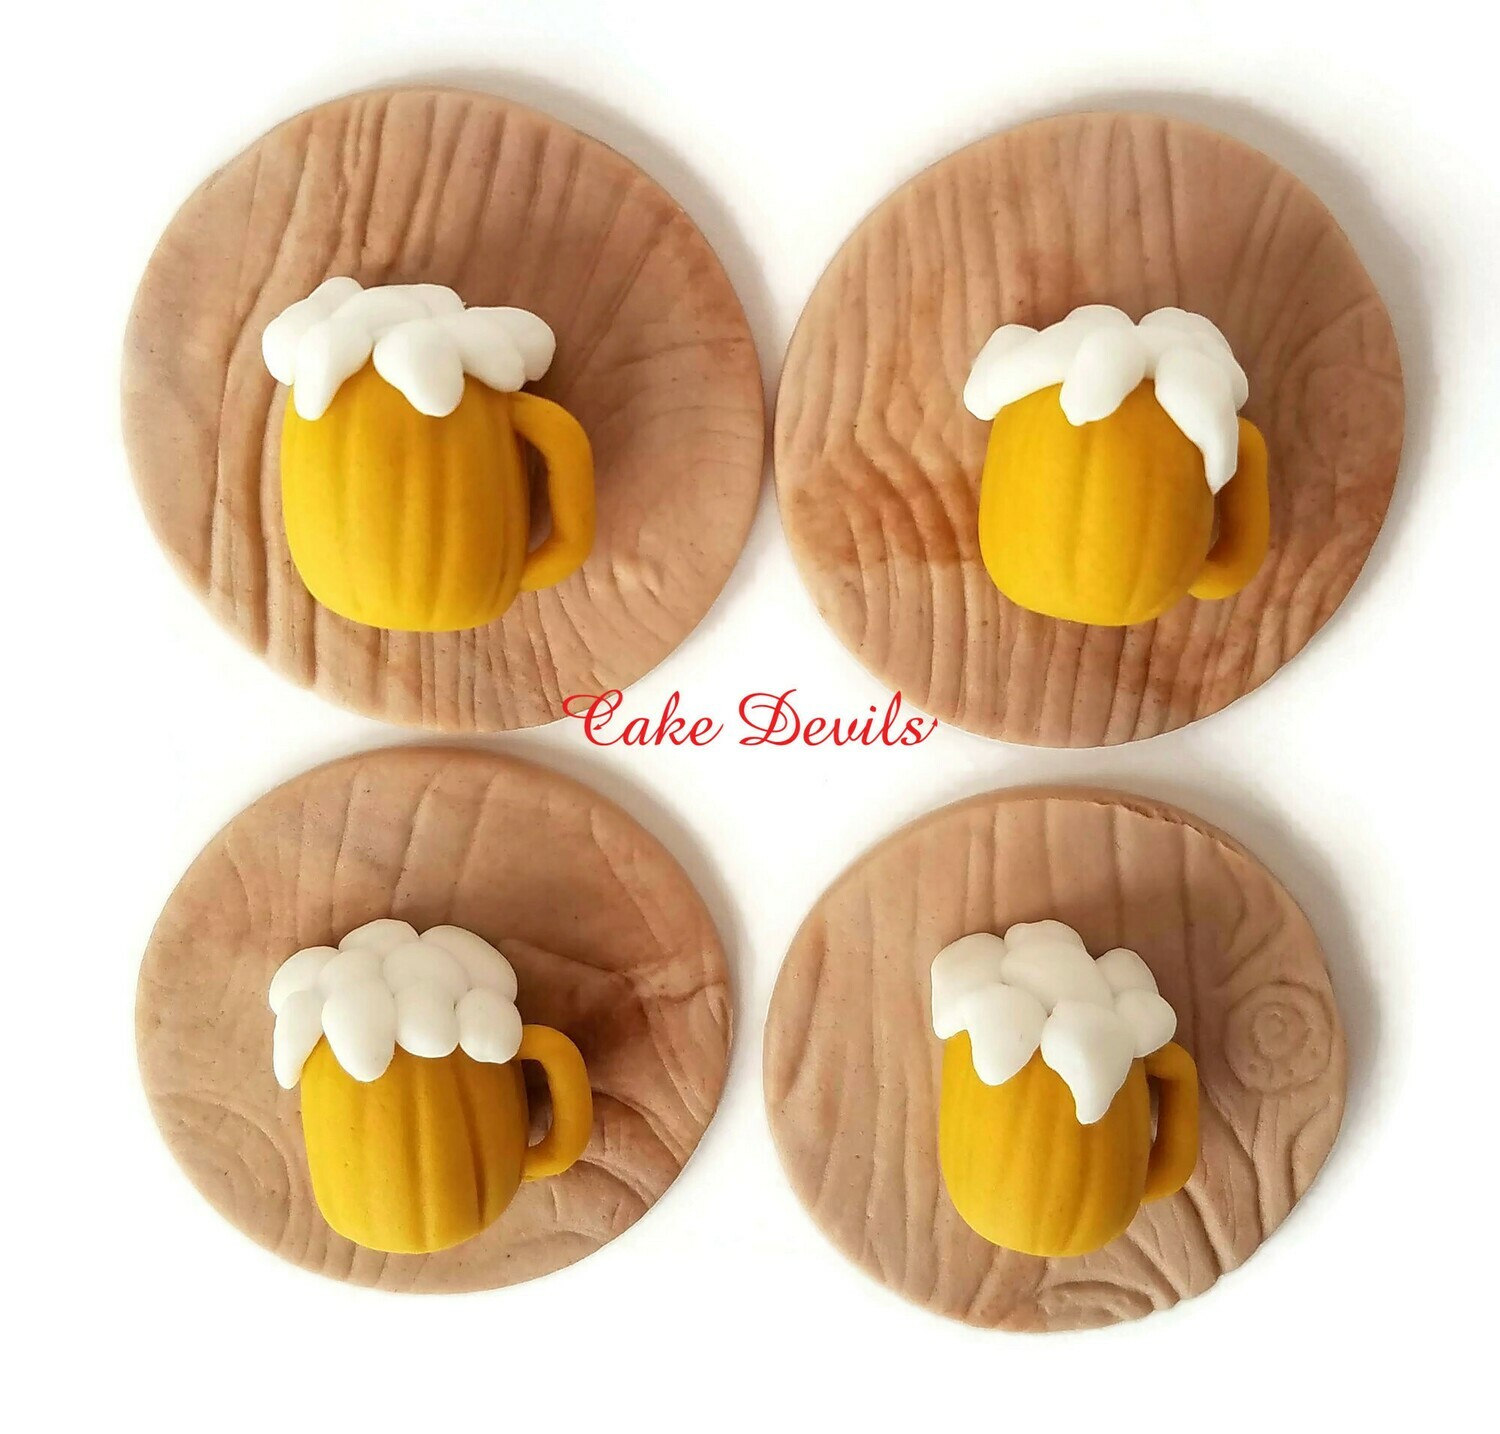 Beer Mug Fondant Cupcake Toppers, great for a birthday party or picnic!